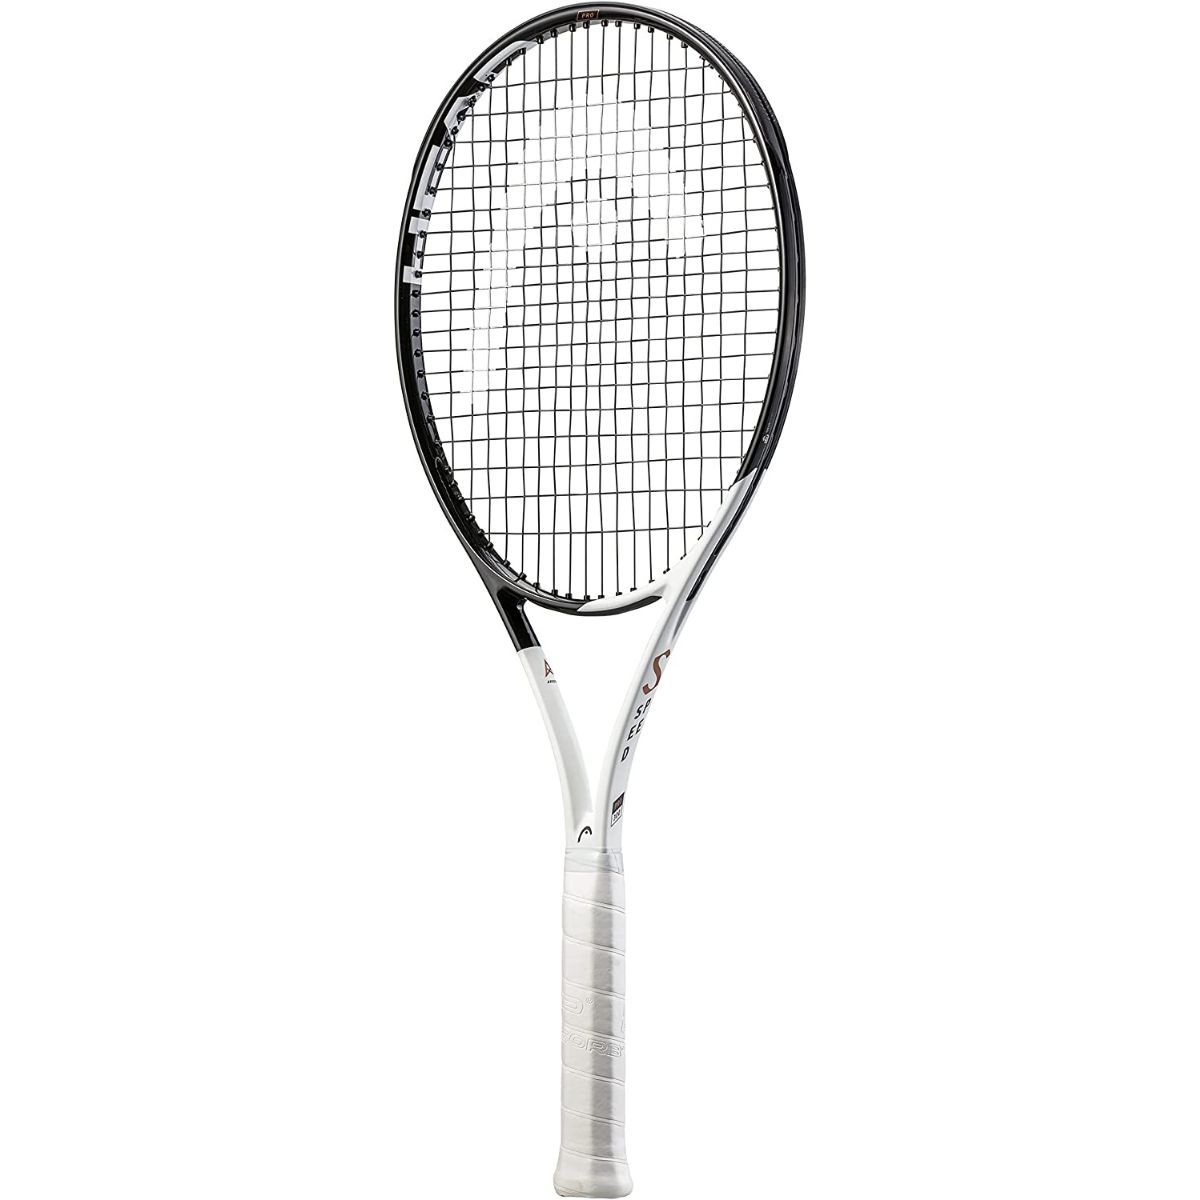 The Best Tennis Rackets for Flat Hitters Options: Head Speed Pro